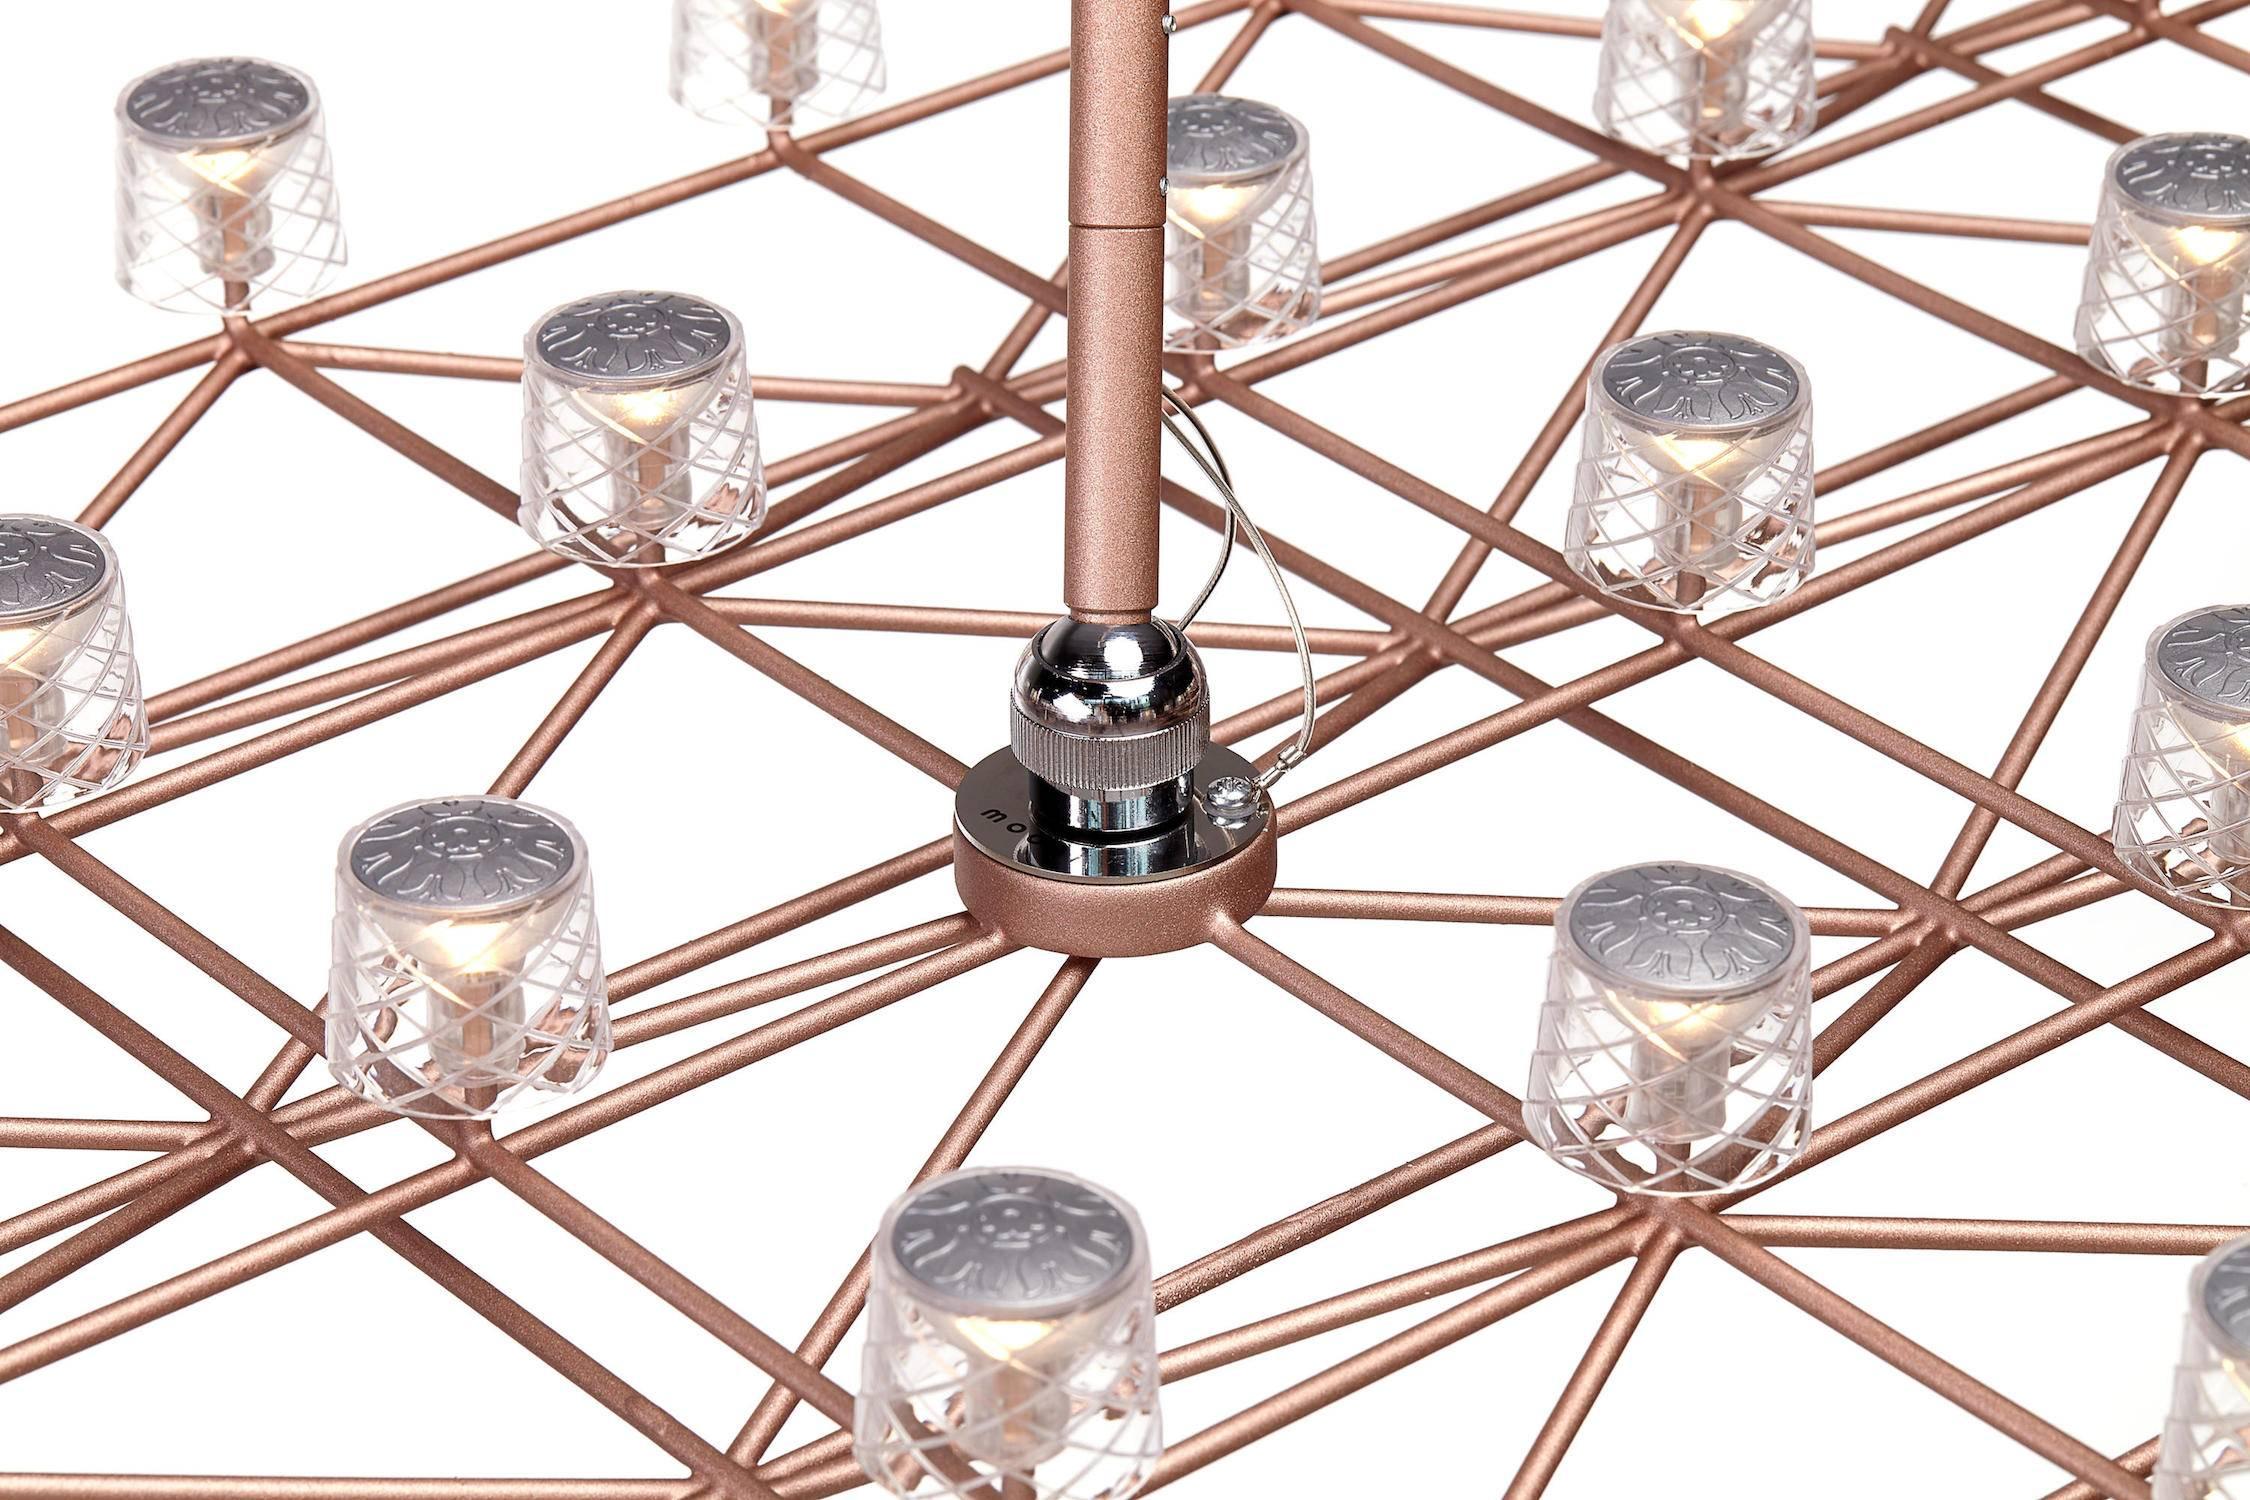 Moooi Space-Frame Small Suspension Light Fixture by Marcel Wanders (Moderne) im Angebot